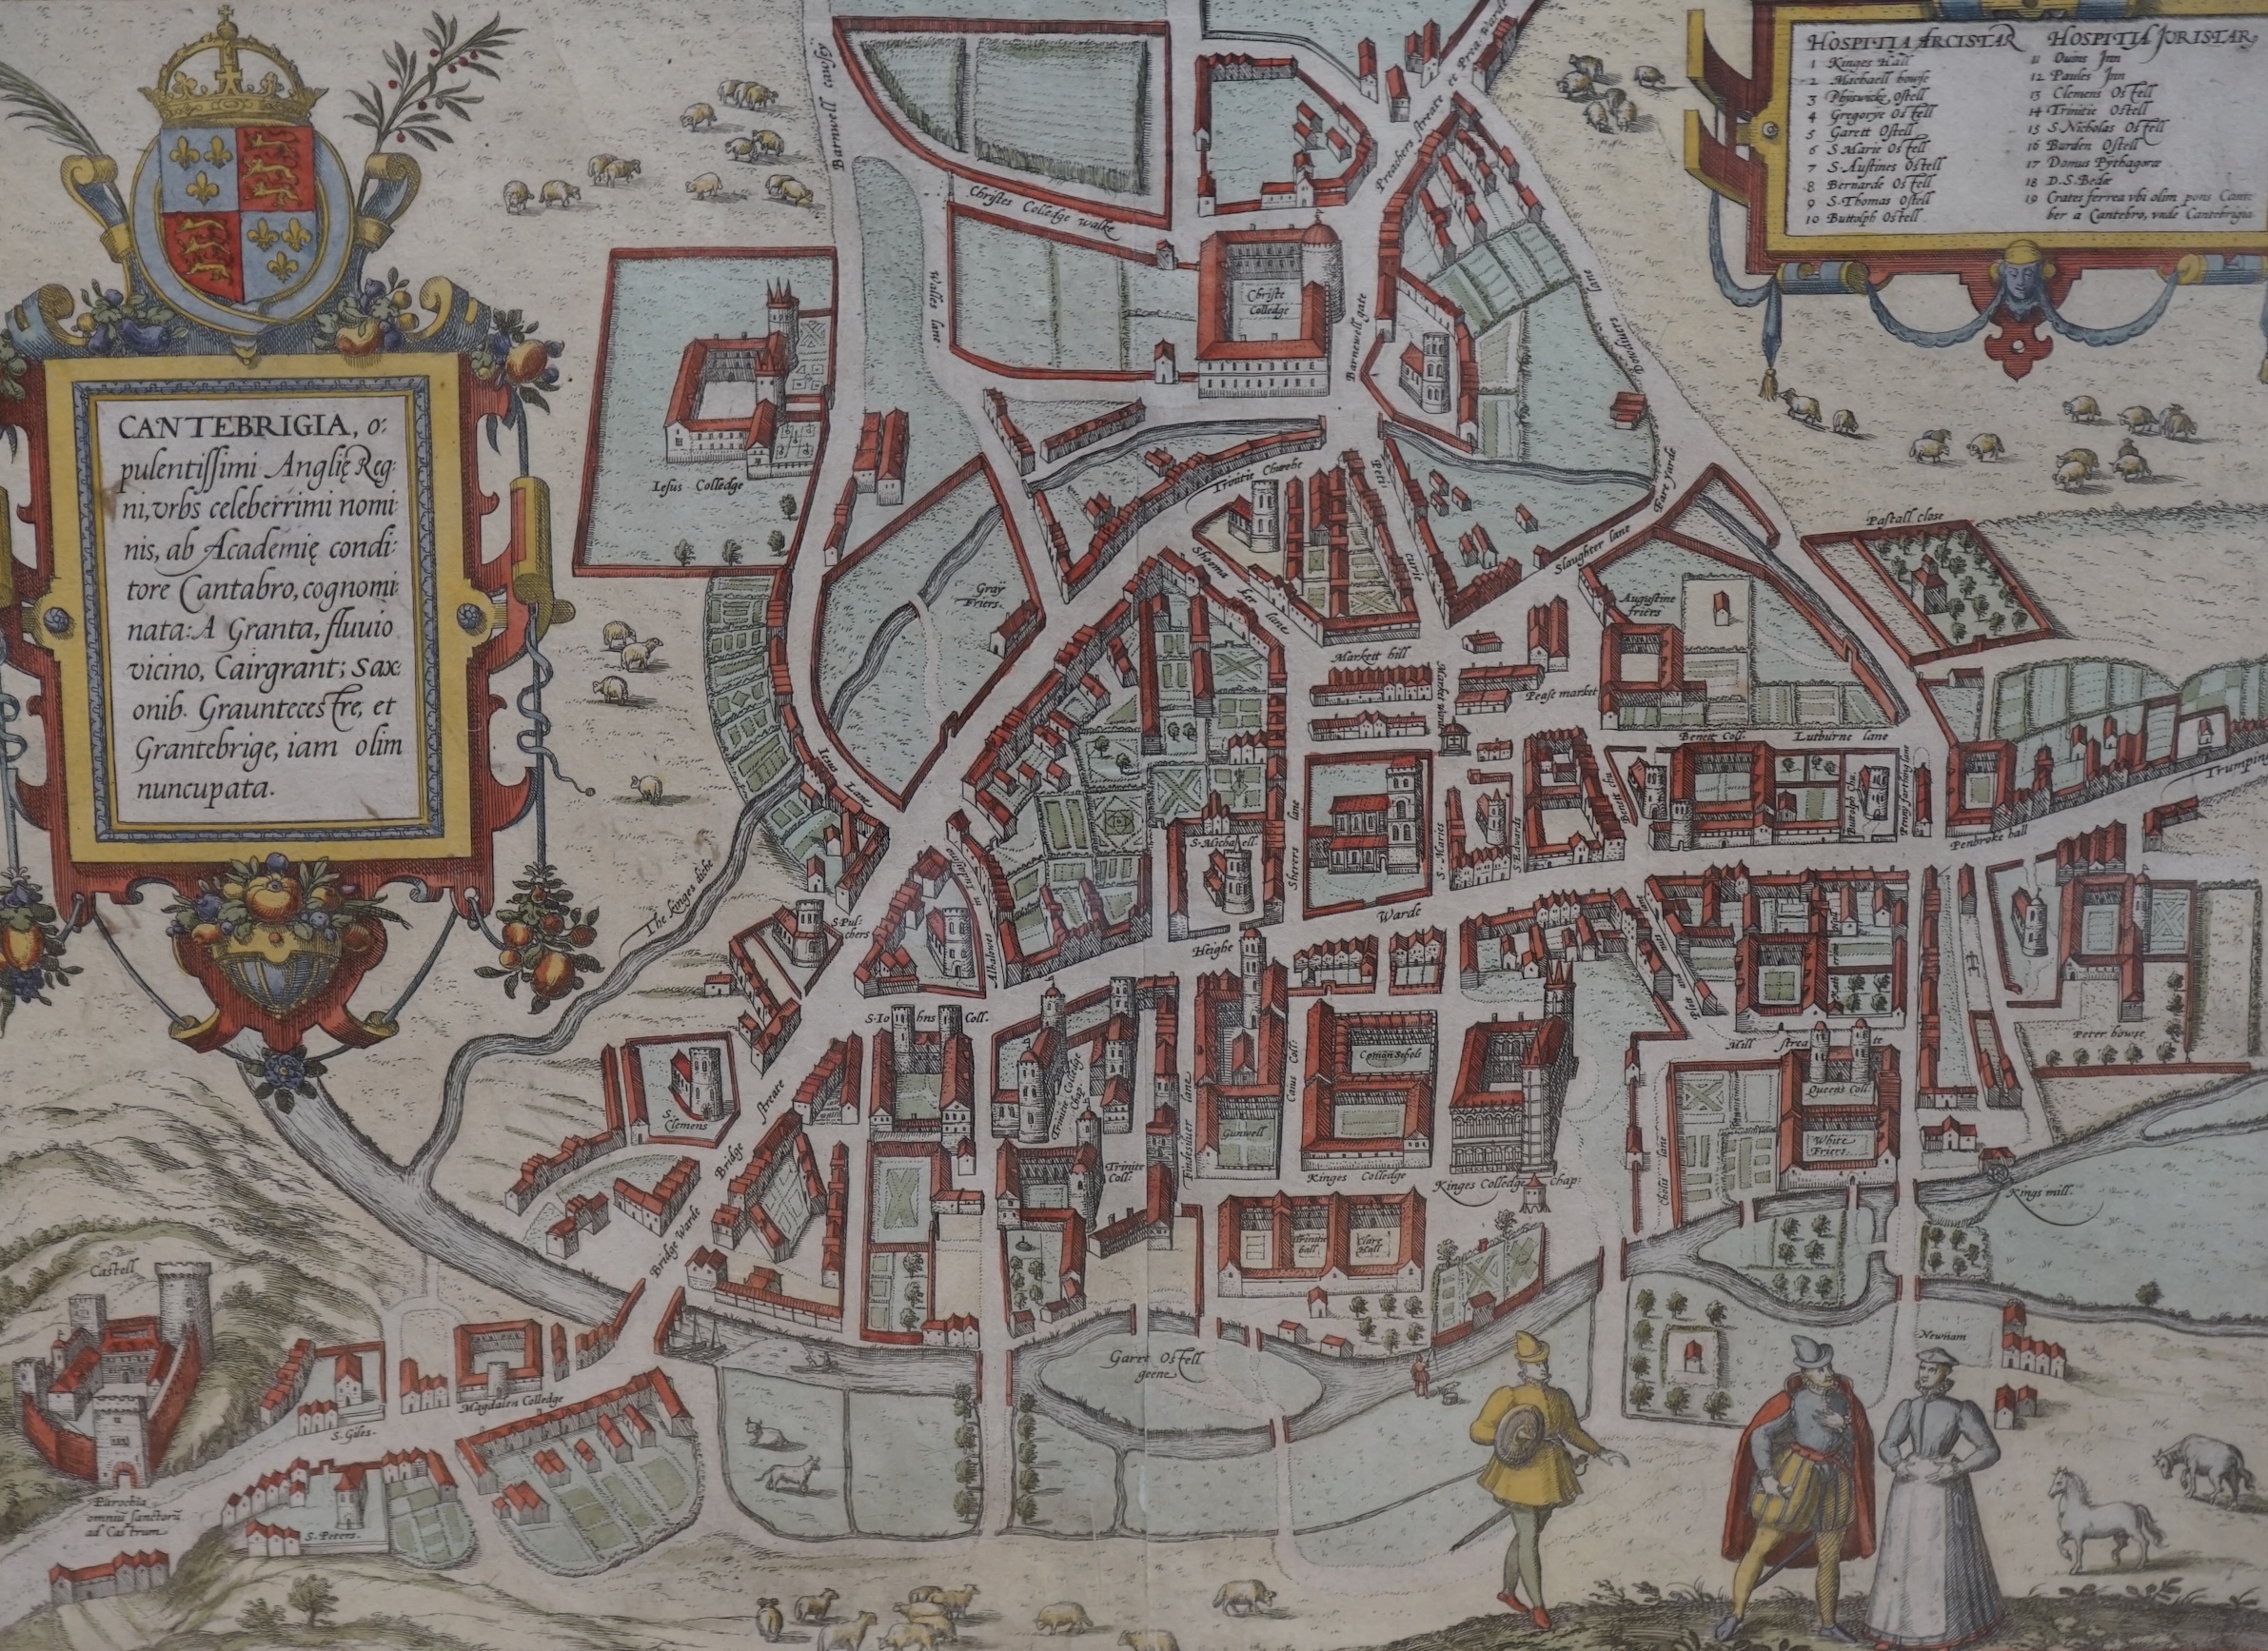 After Georg Braun (1541-1622), hand coloured engraved map of Canterbury, 33 x 45cm. Condition - fair